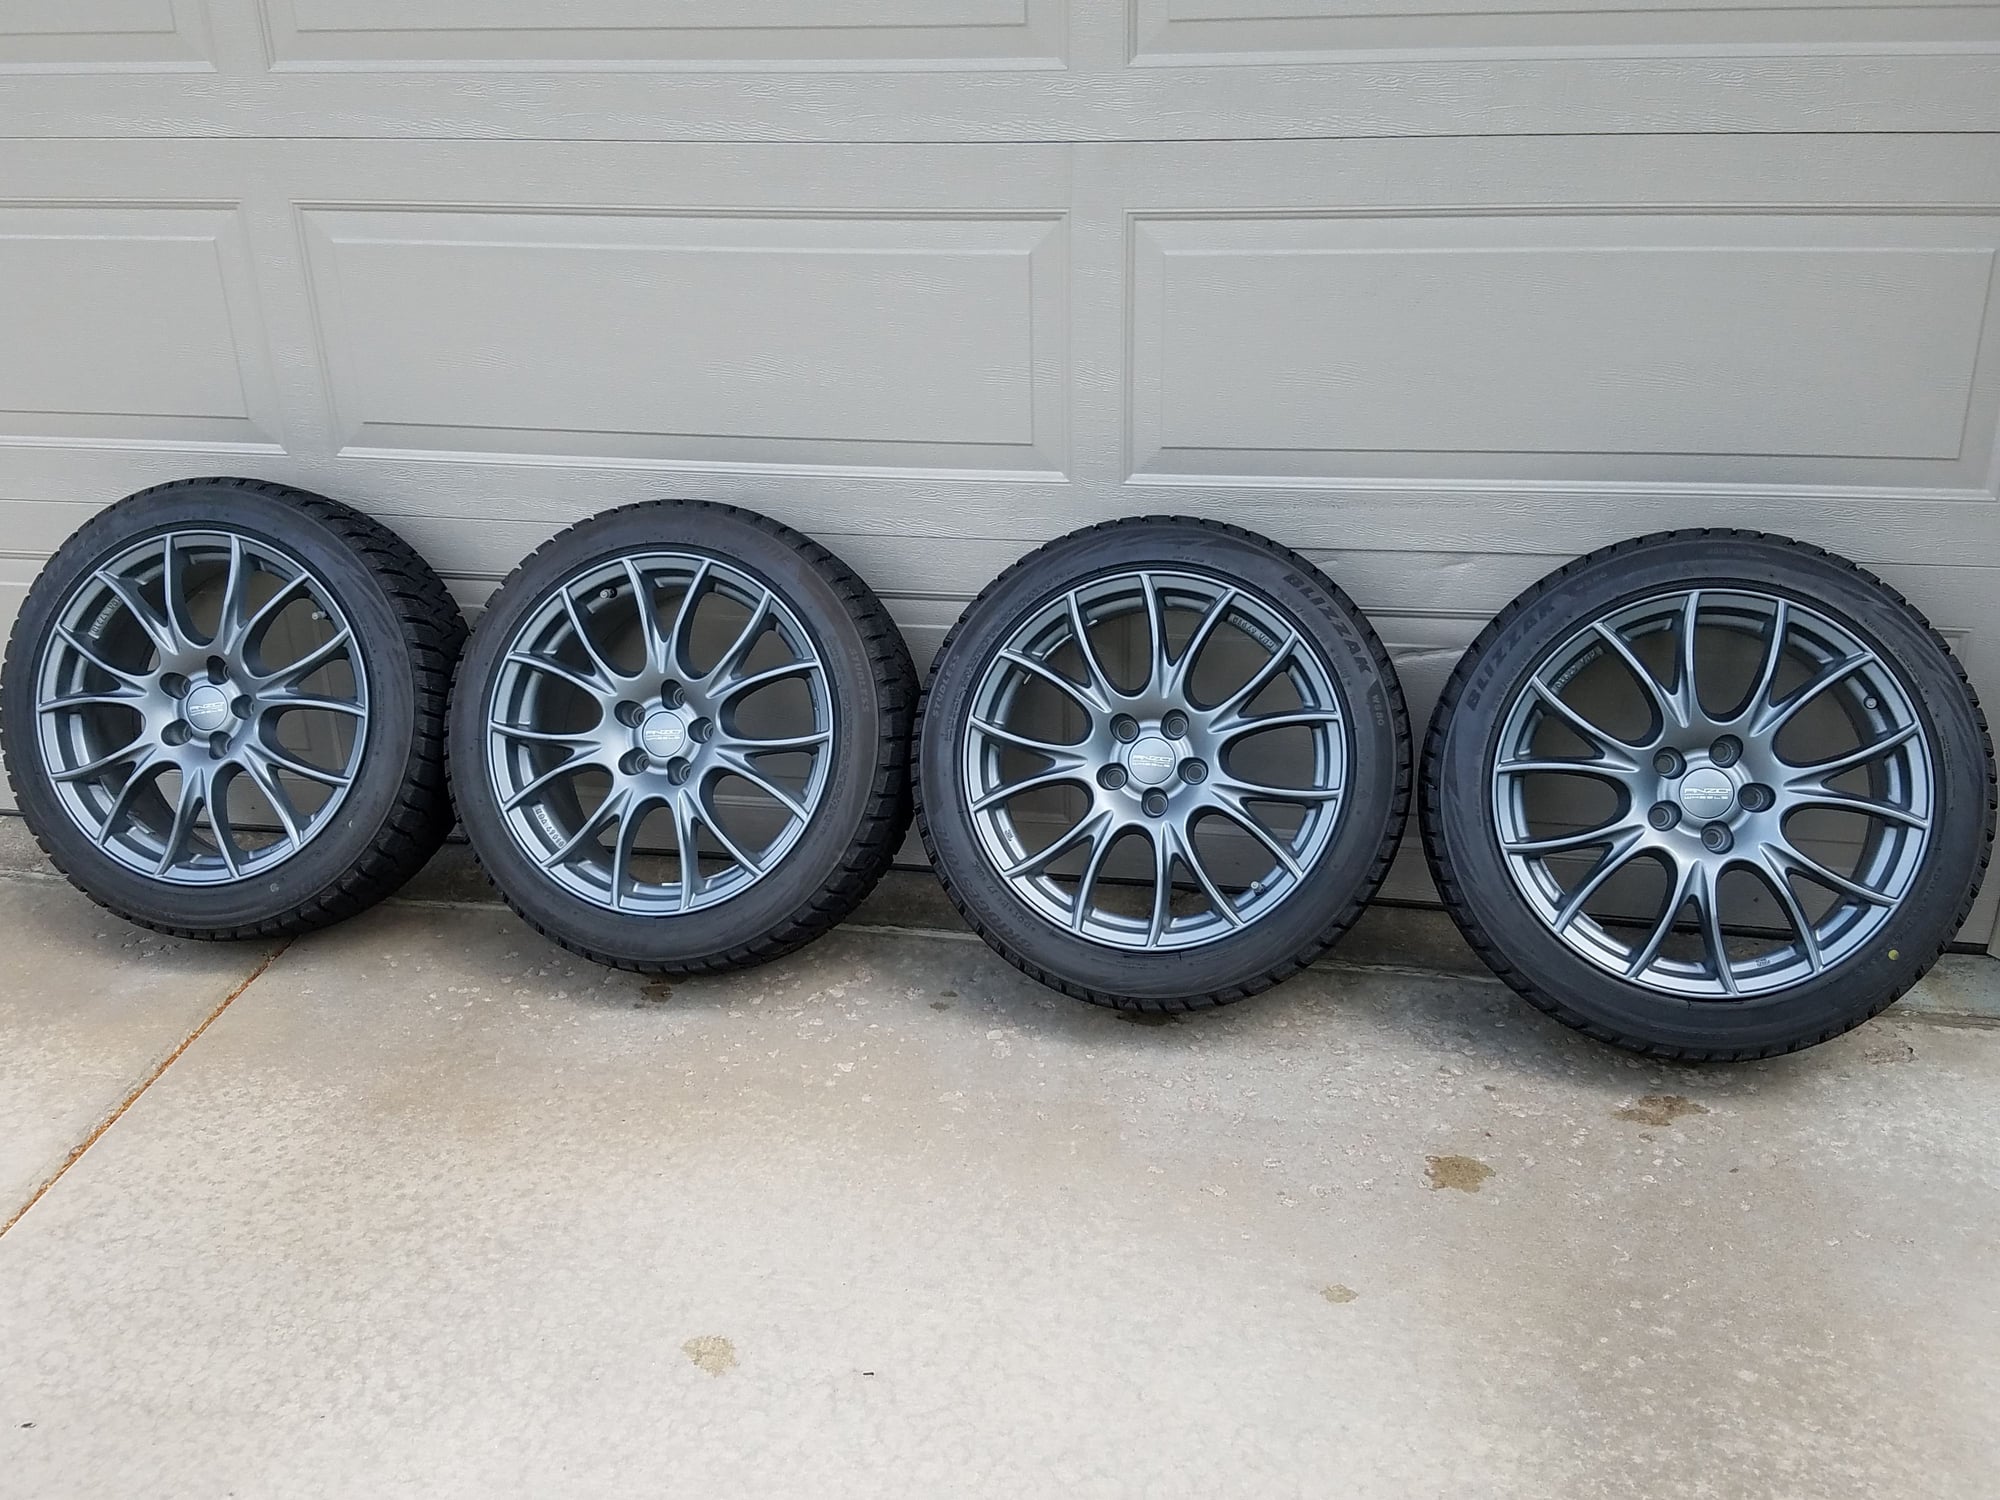 Wheels and Tires/Axles - Blizzack WS80 snow tires and after-market wheels - Used - 2015 to 2018 Any Make All Models - Sioux Falls, SD 57110, United States